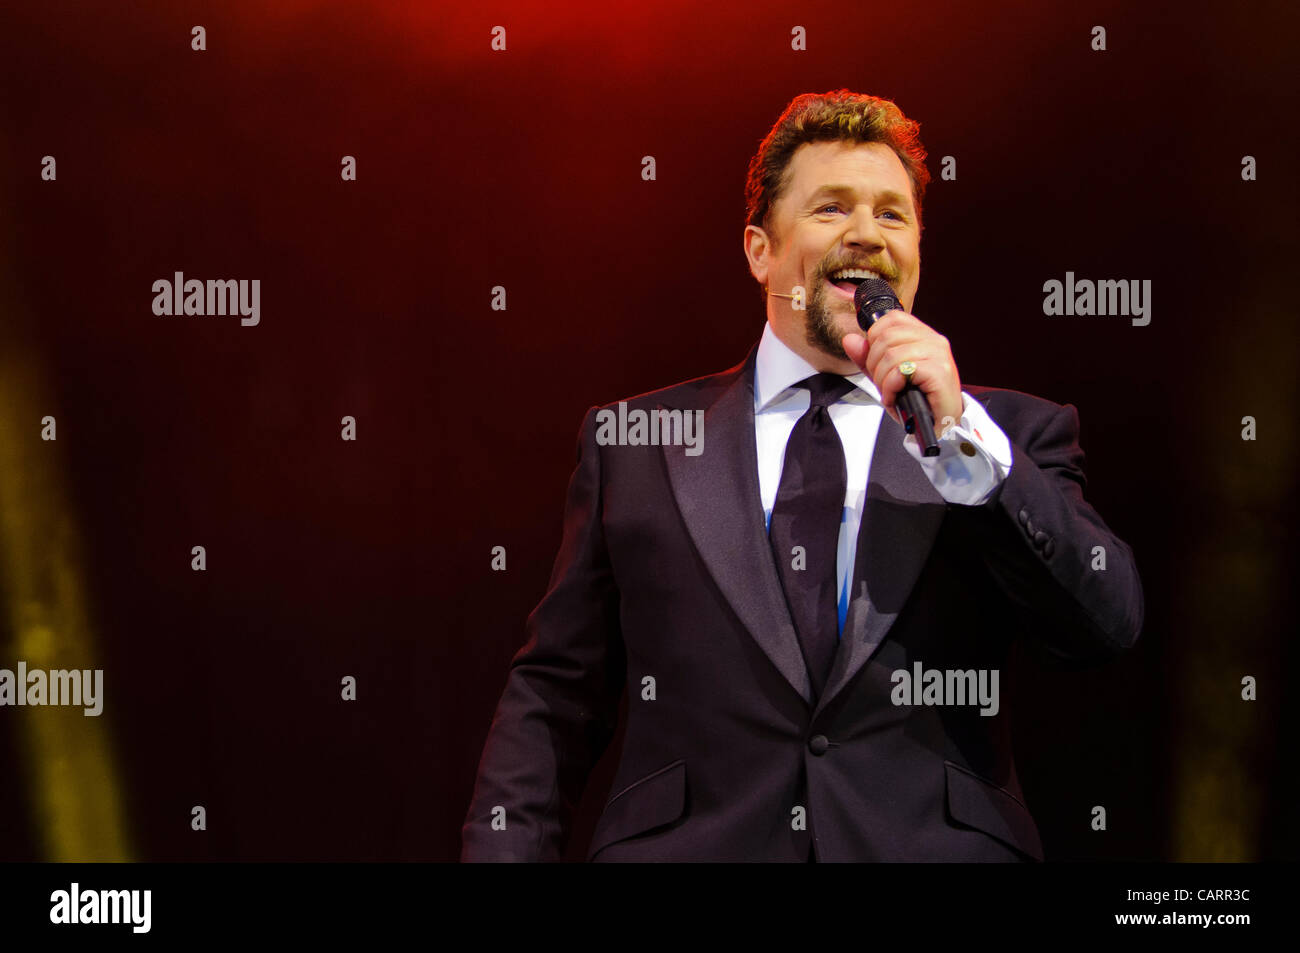 LONDON, Covent Garden, 15 April 2012.  At the Olivier Awards 2012, Michael Ball (singer and actor) prepares to introduce the announcers of the BBC Radio 2 Olivier Audience Award. Photograph : Stephen Chung Stock Photo